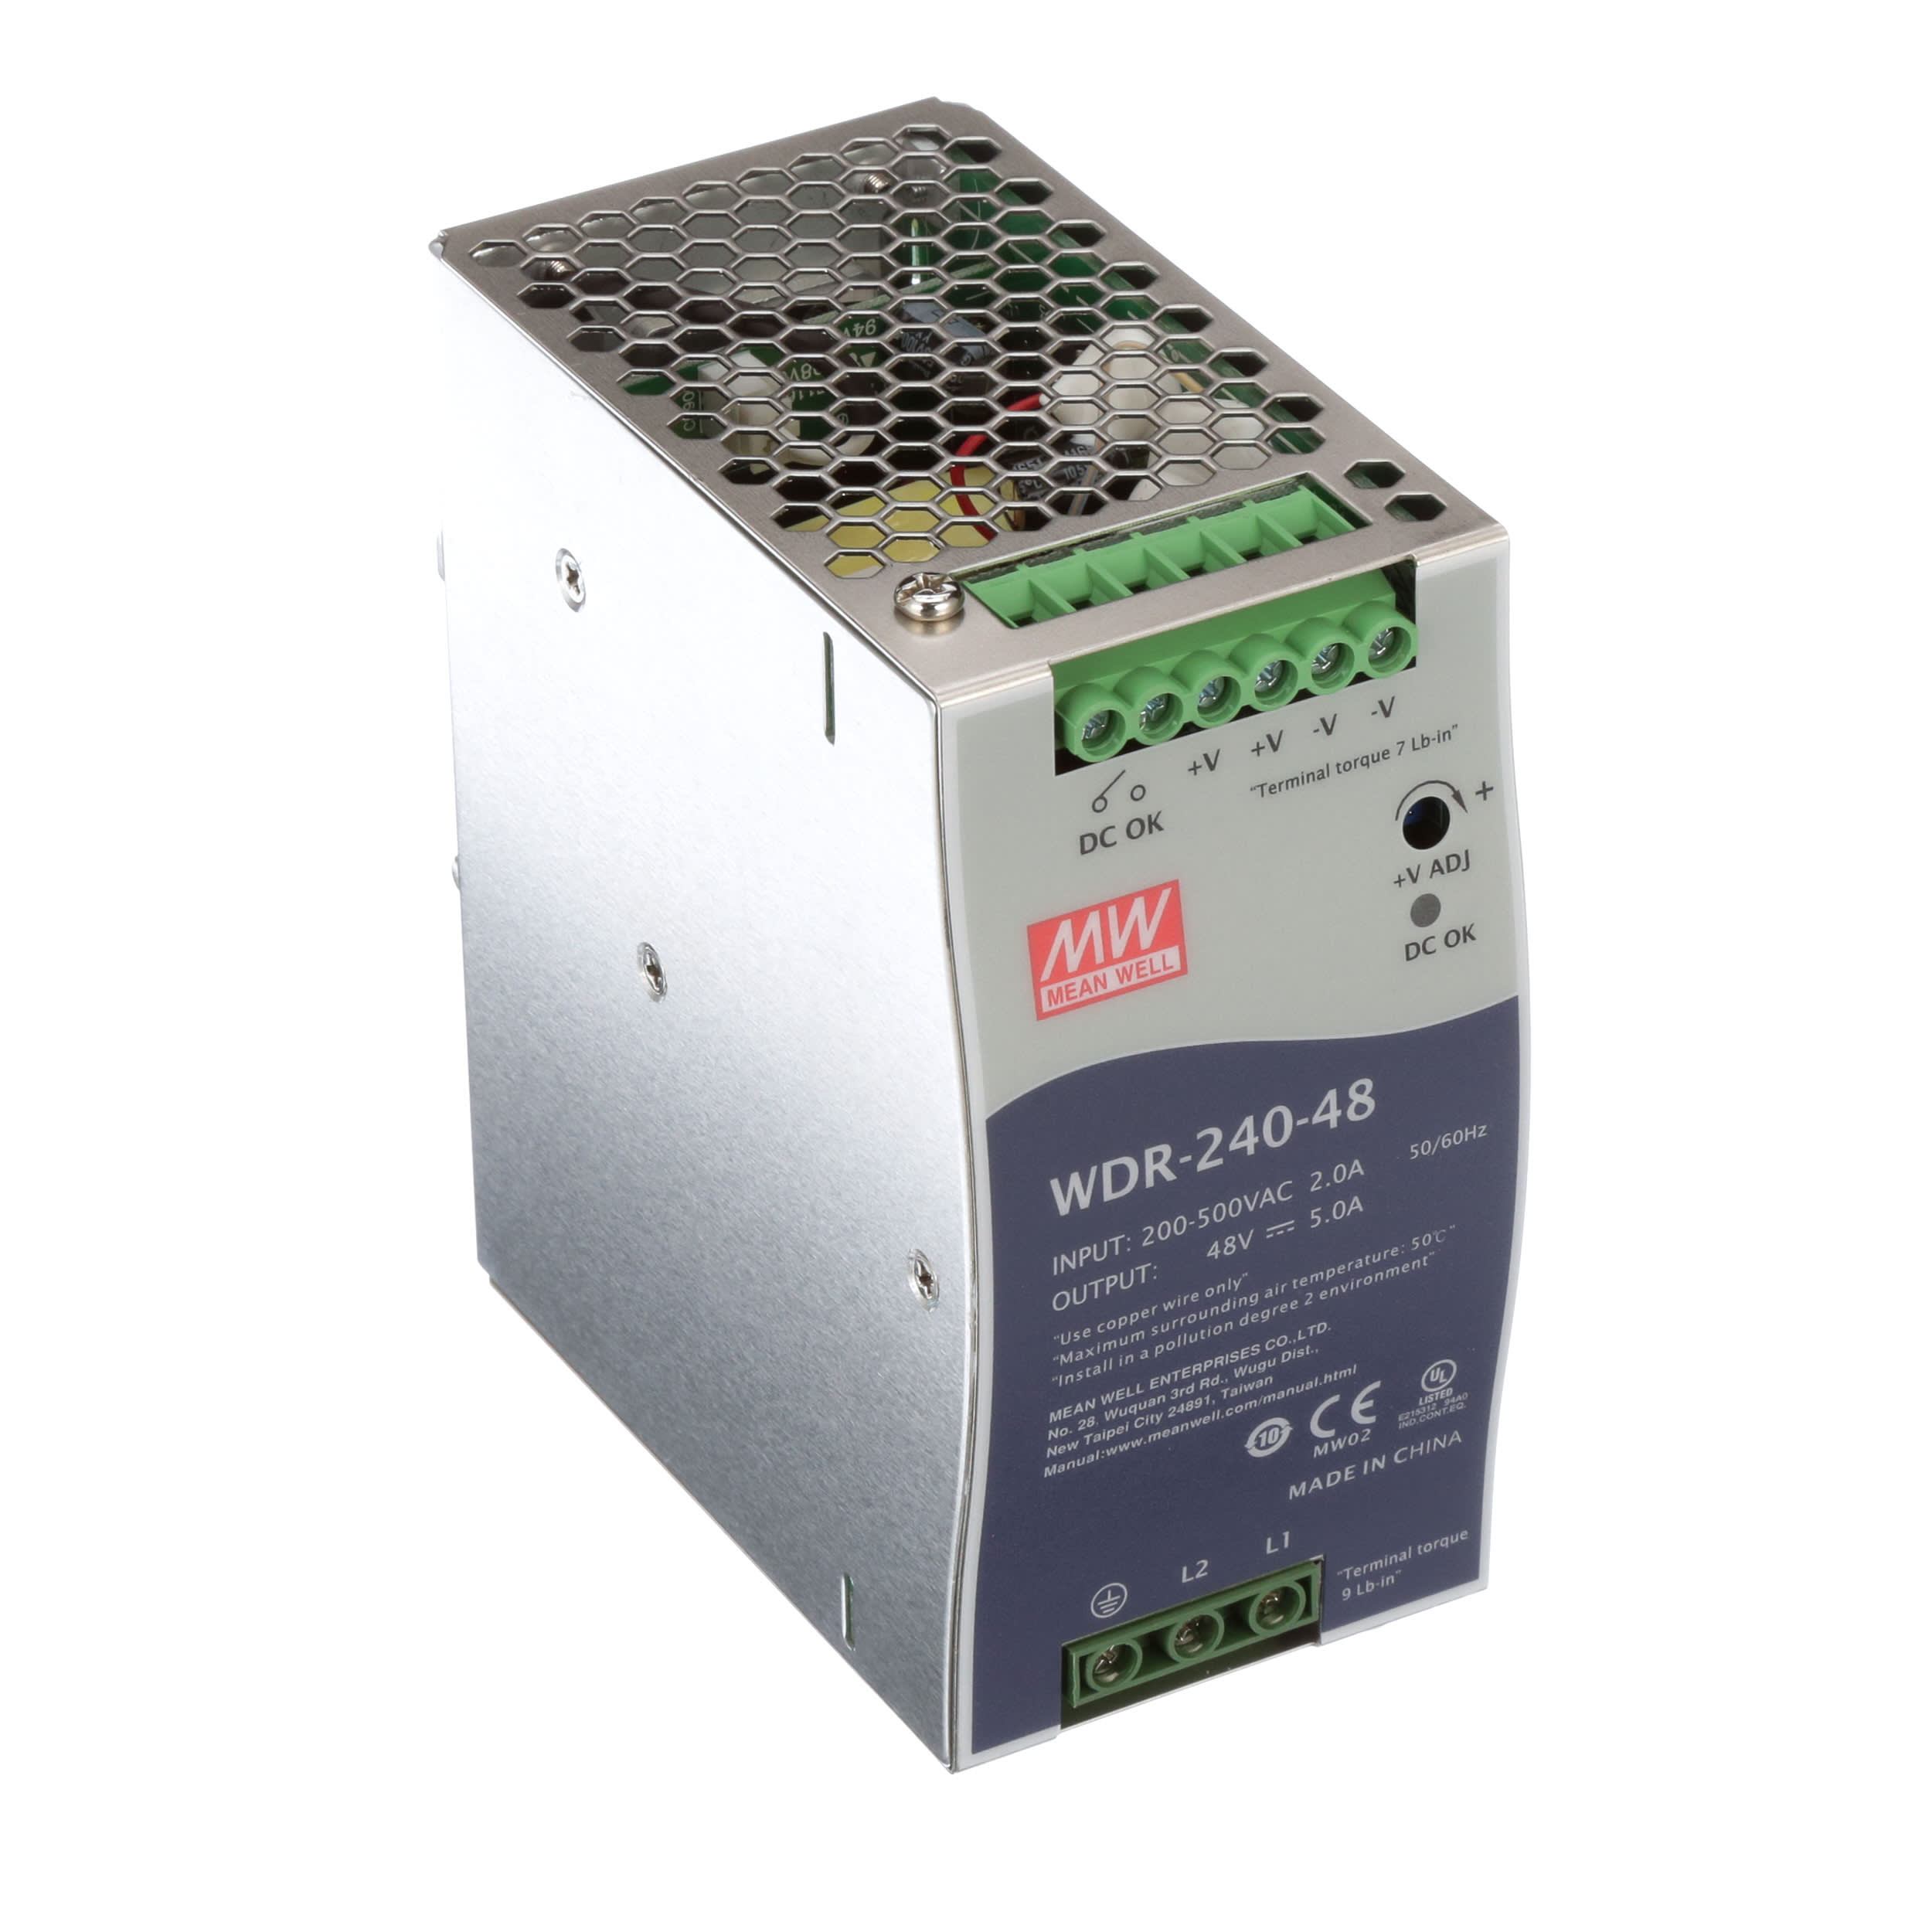 Mean Well S-240-48 Power Supply 48v 5a for sale online 